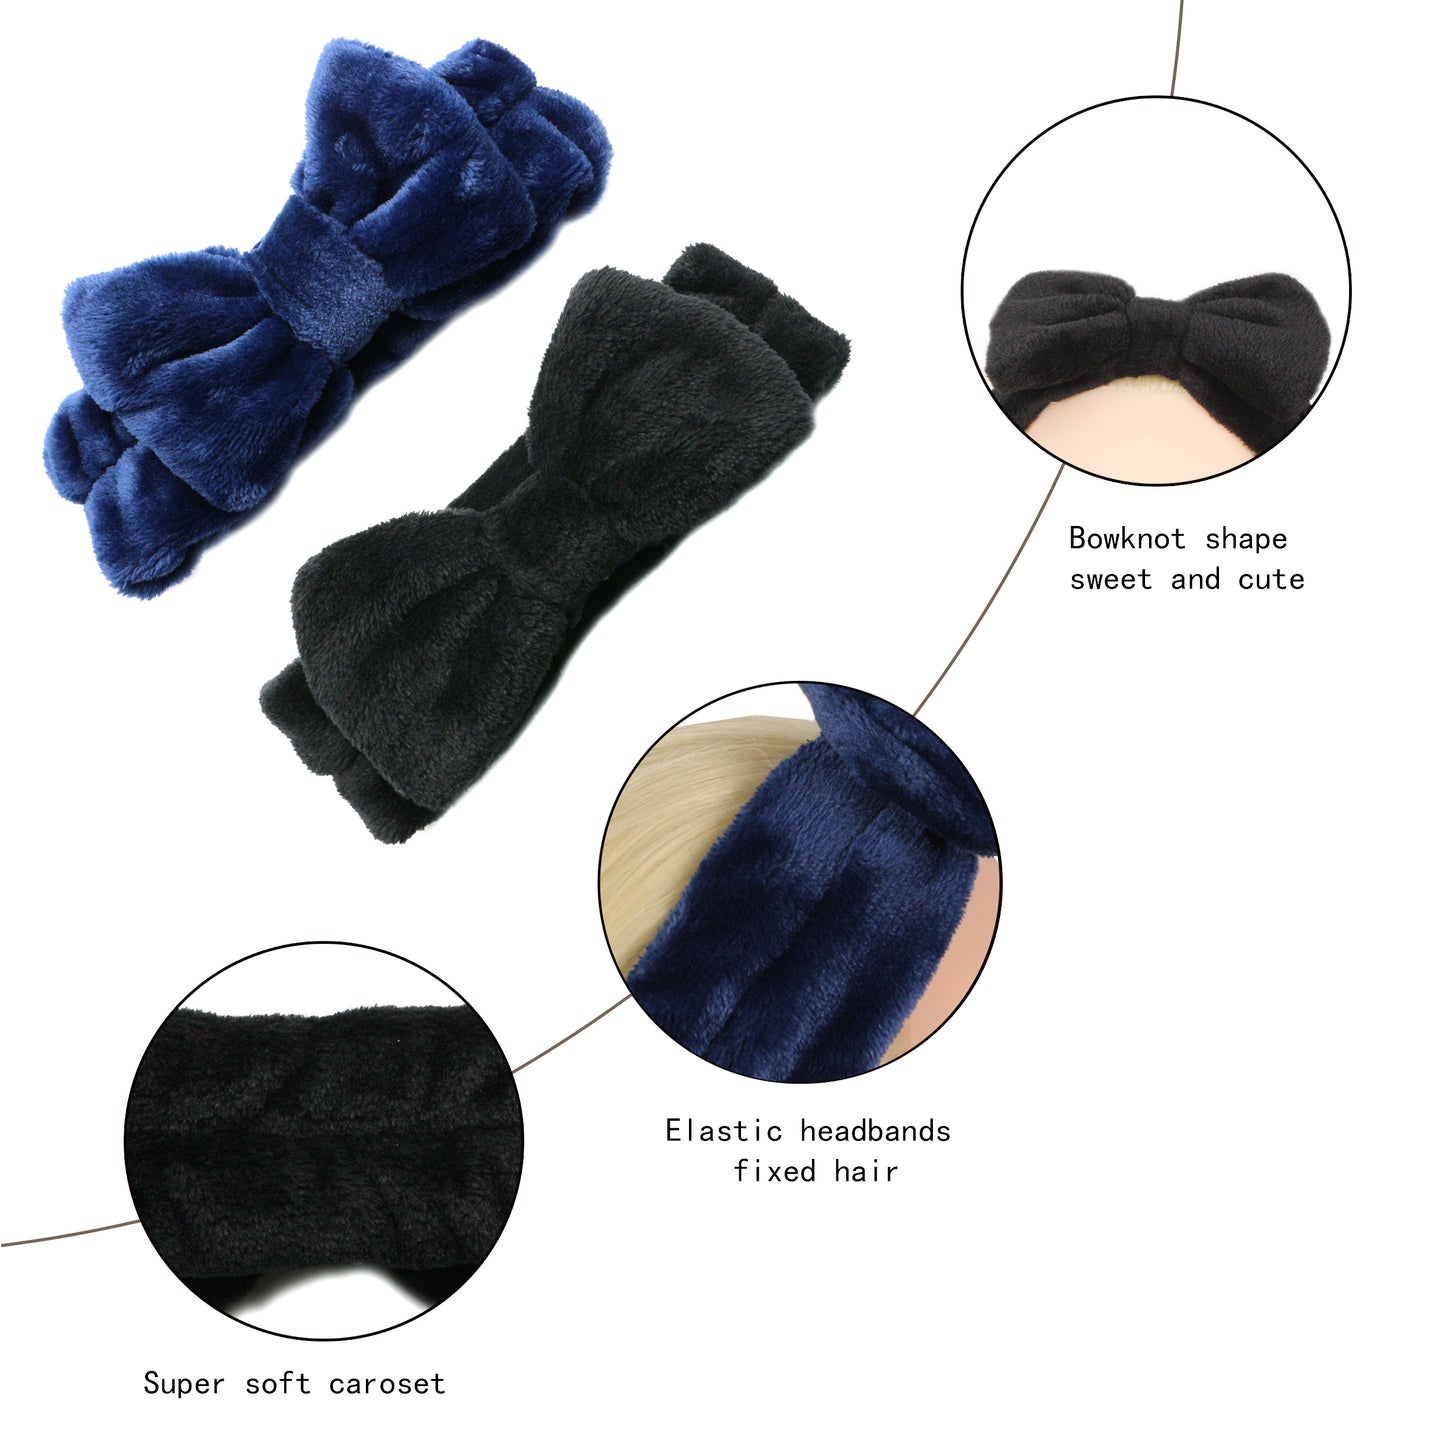 BSCI Audited Factory 2Pcs Cute Bowknot Bow Makeup Cosmetic Headbands for Washing Face Shower Hairbands, Spa Headbands for Women